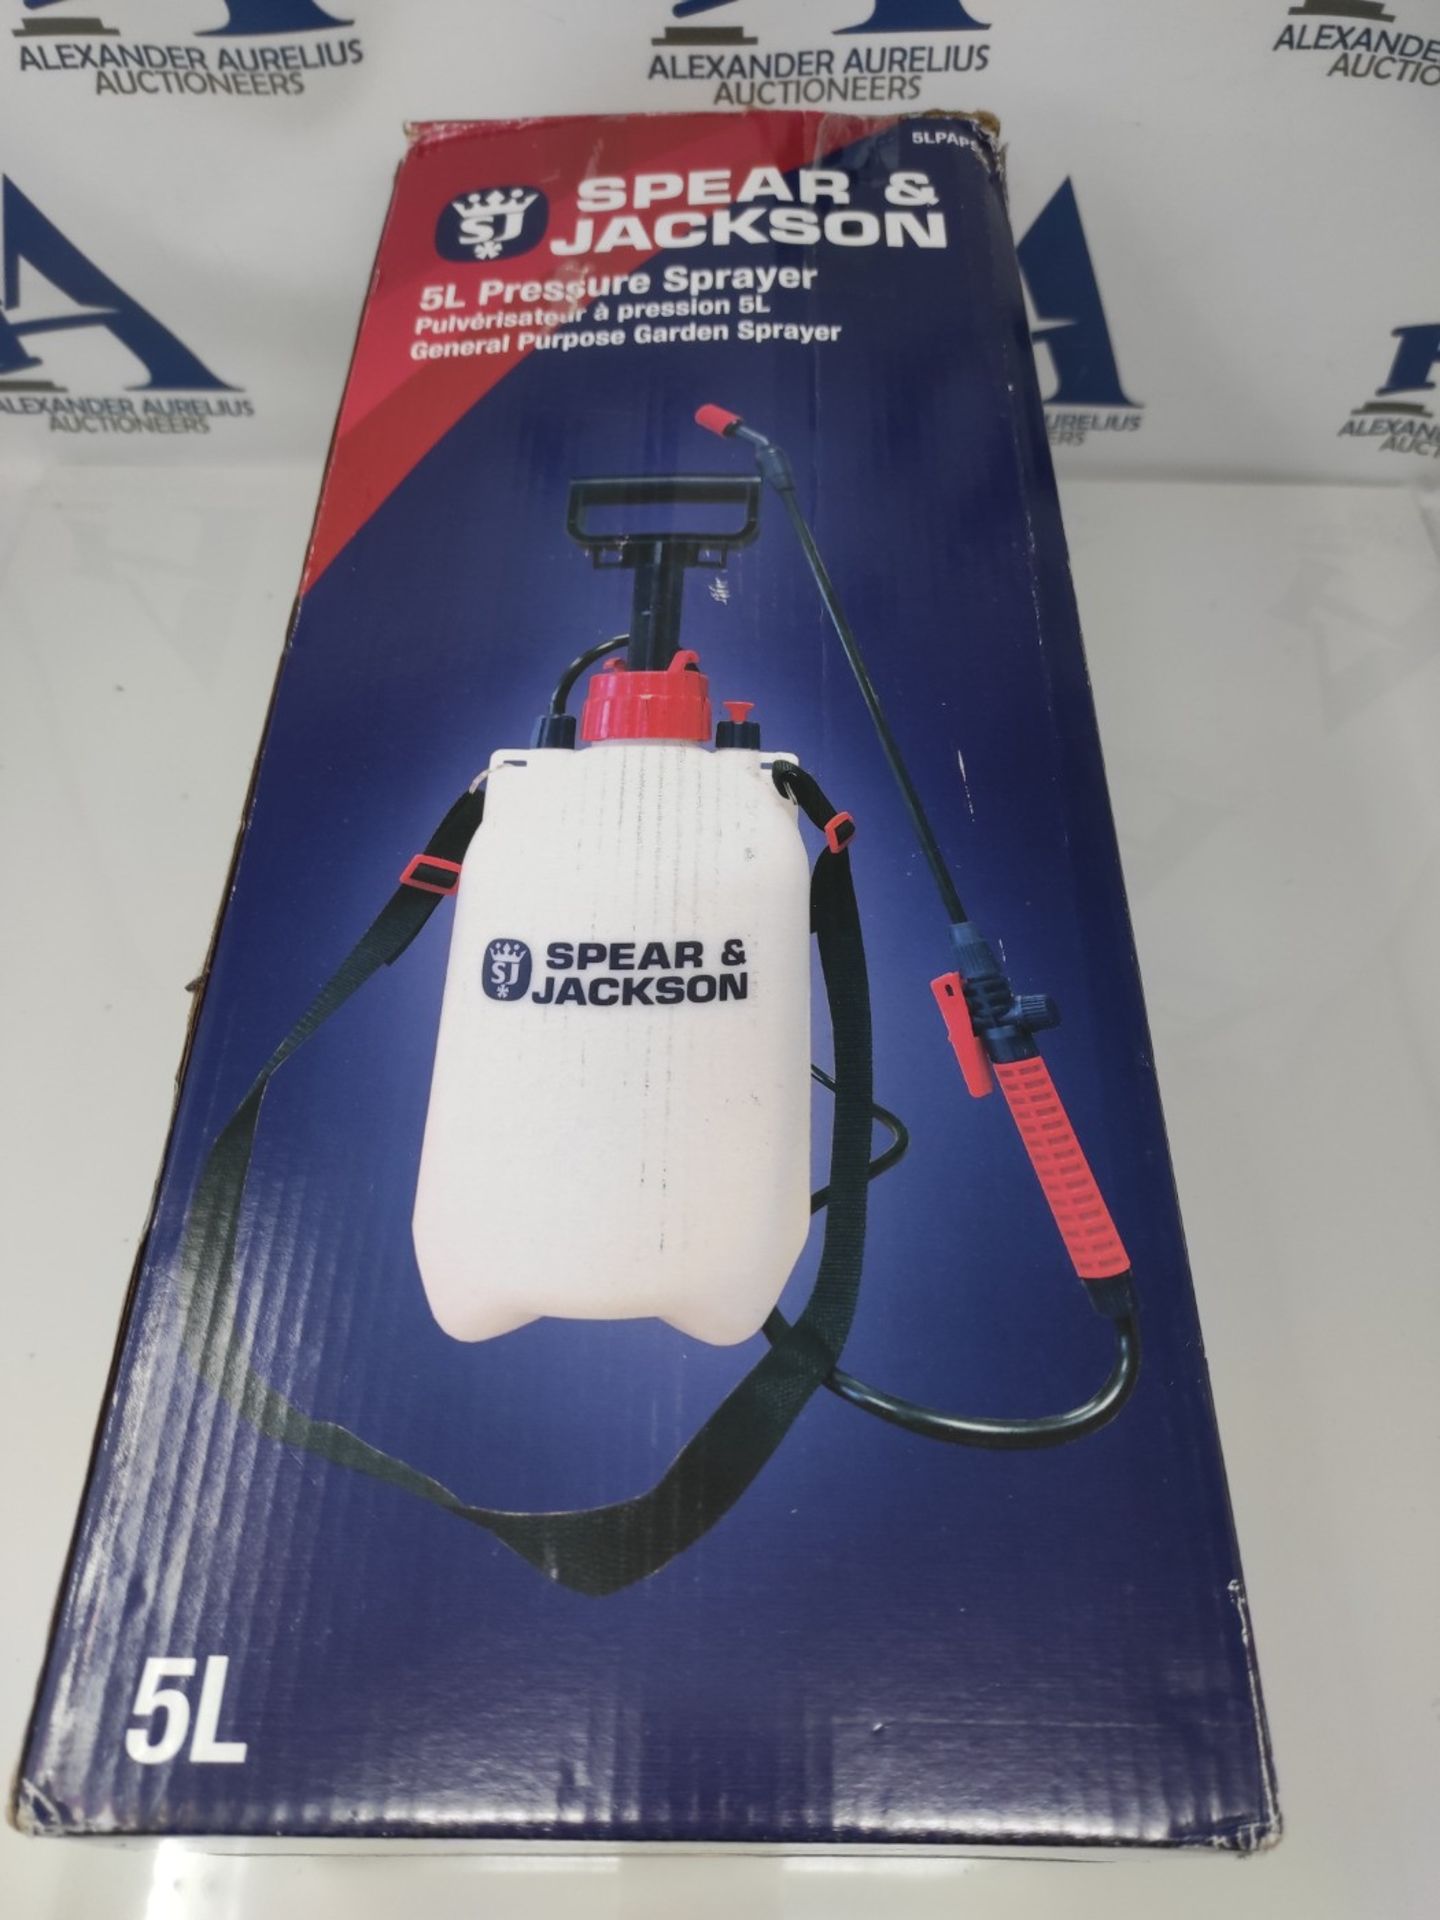 Spear & Jackson 5LPAPS Pressure Sprayer, with pump action, 5 liters - Image 2 of 3